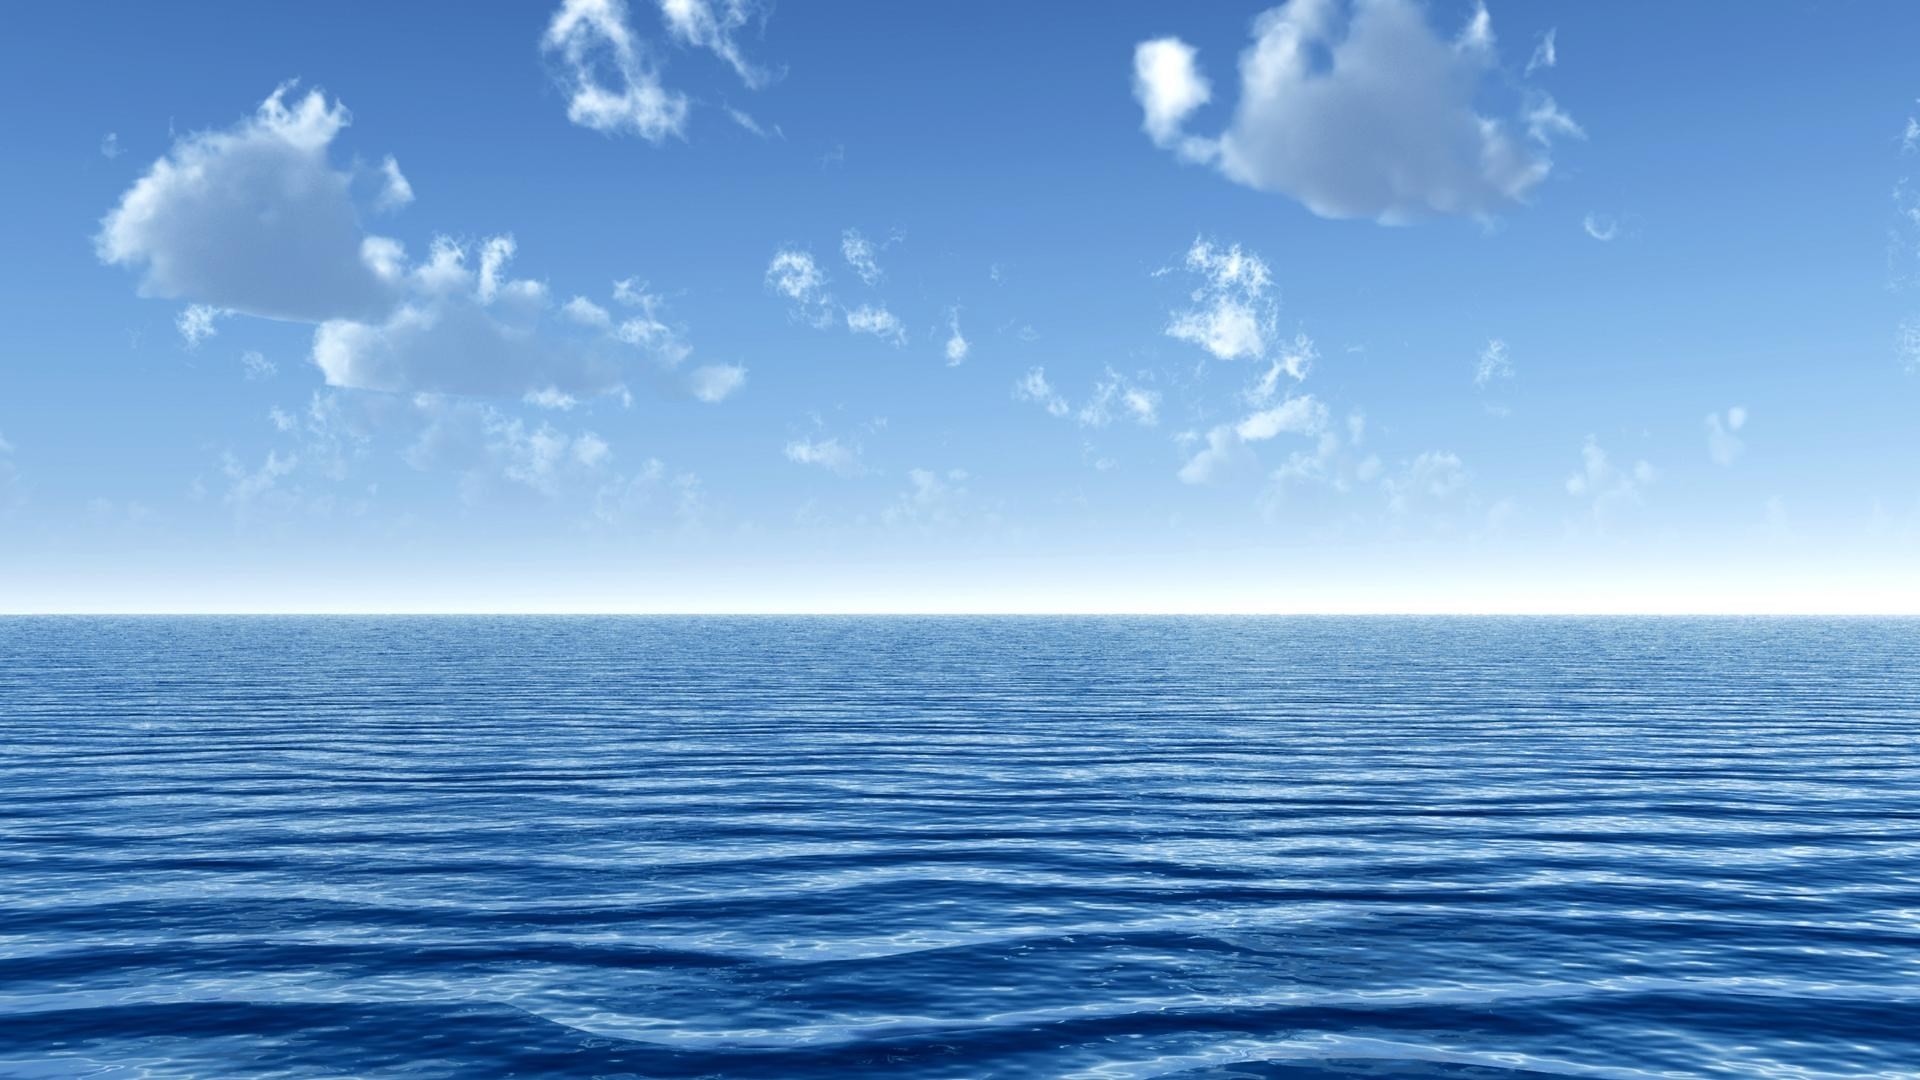 1920x1080 ocean images background